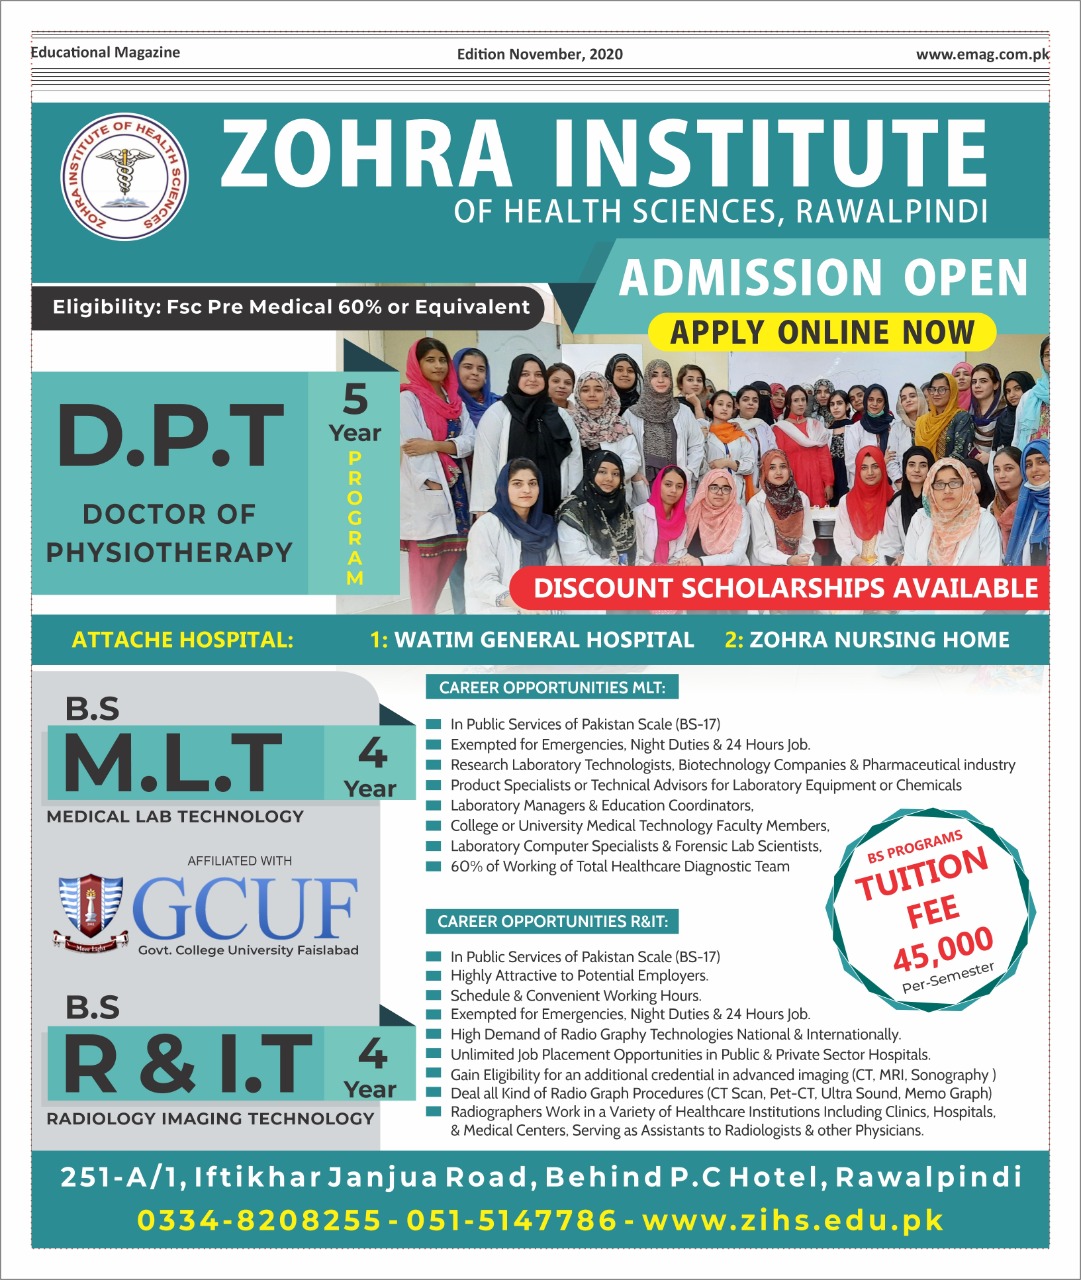 (MLT) Medical lab technology in zohra institute ofhealth sciences admission 2020